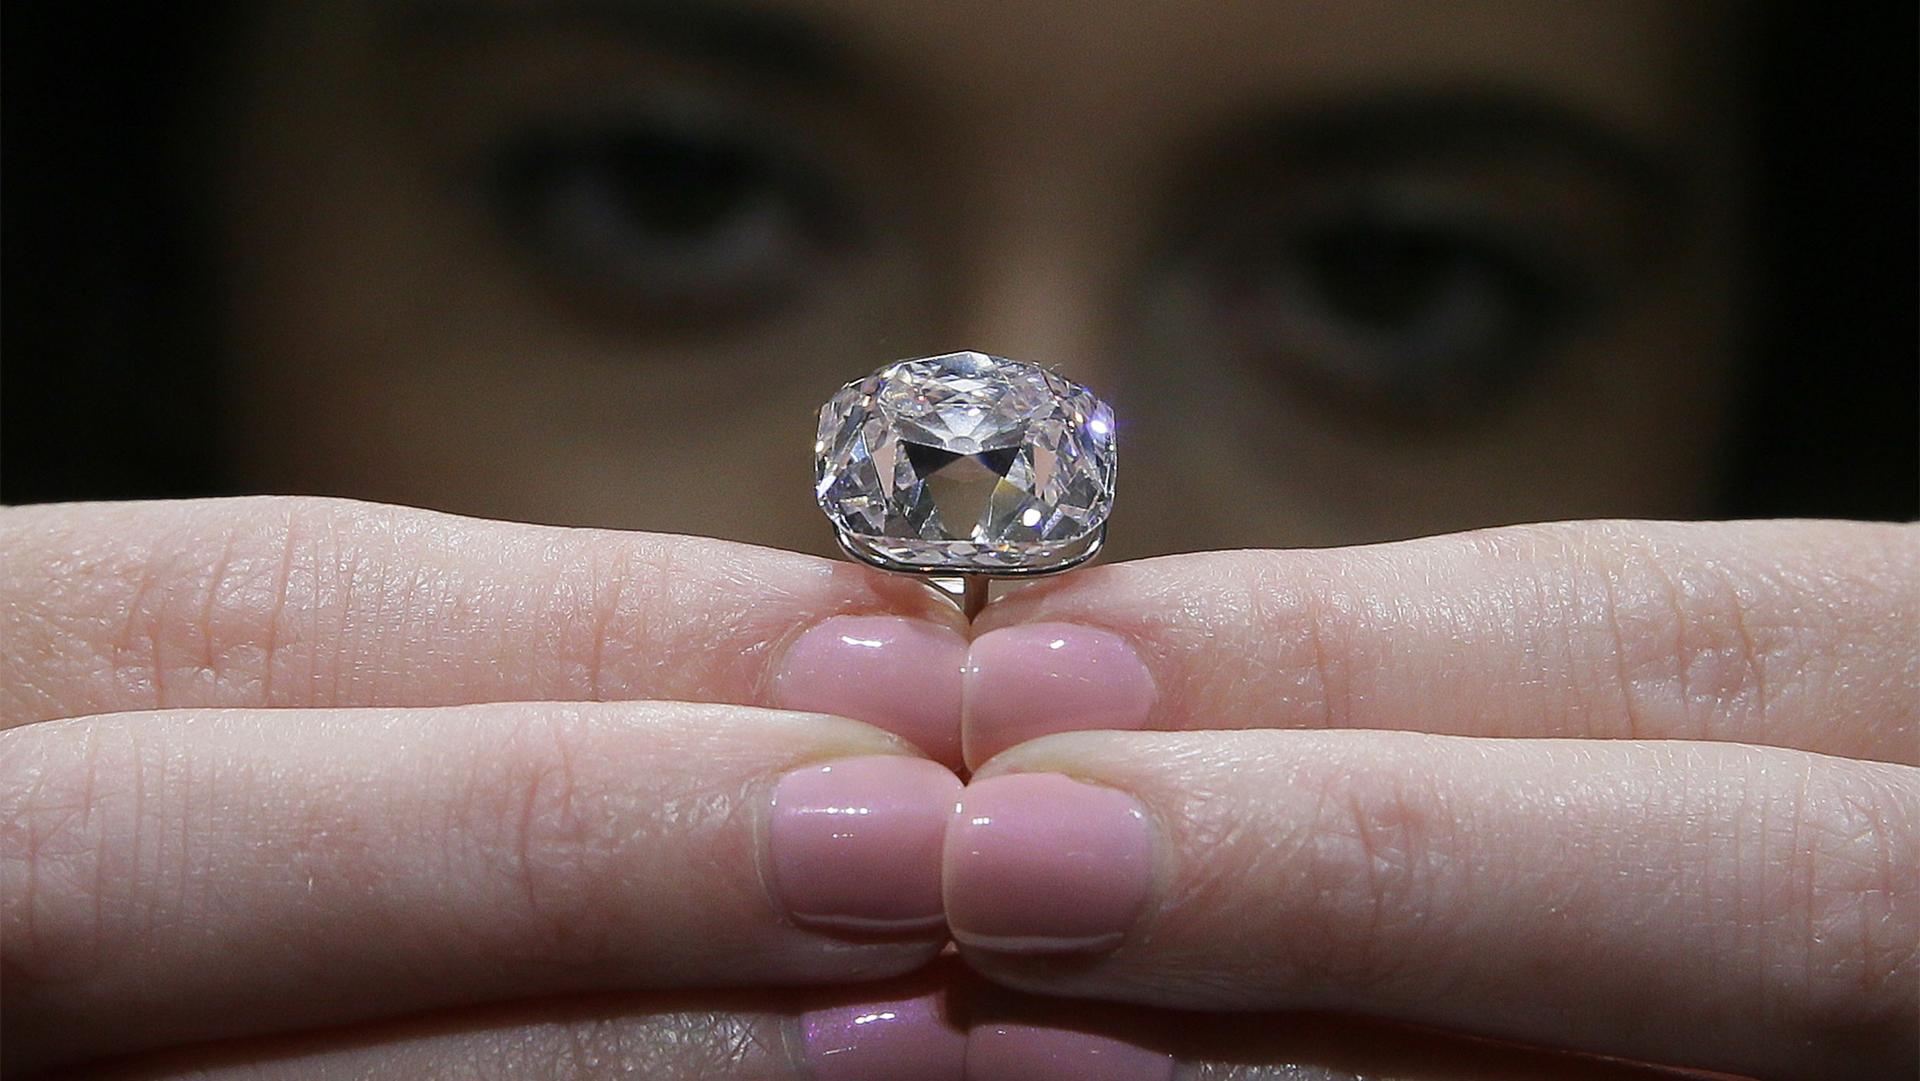 A member of auction house staff poses for a picture with a 19-carat pink diamond at Christie's auction house, in London, Oct. 18, 2017. 